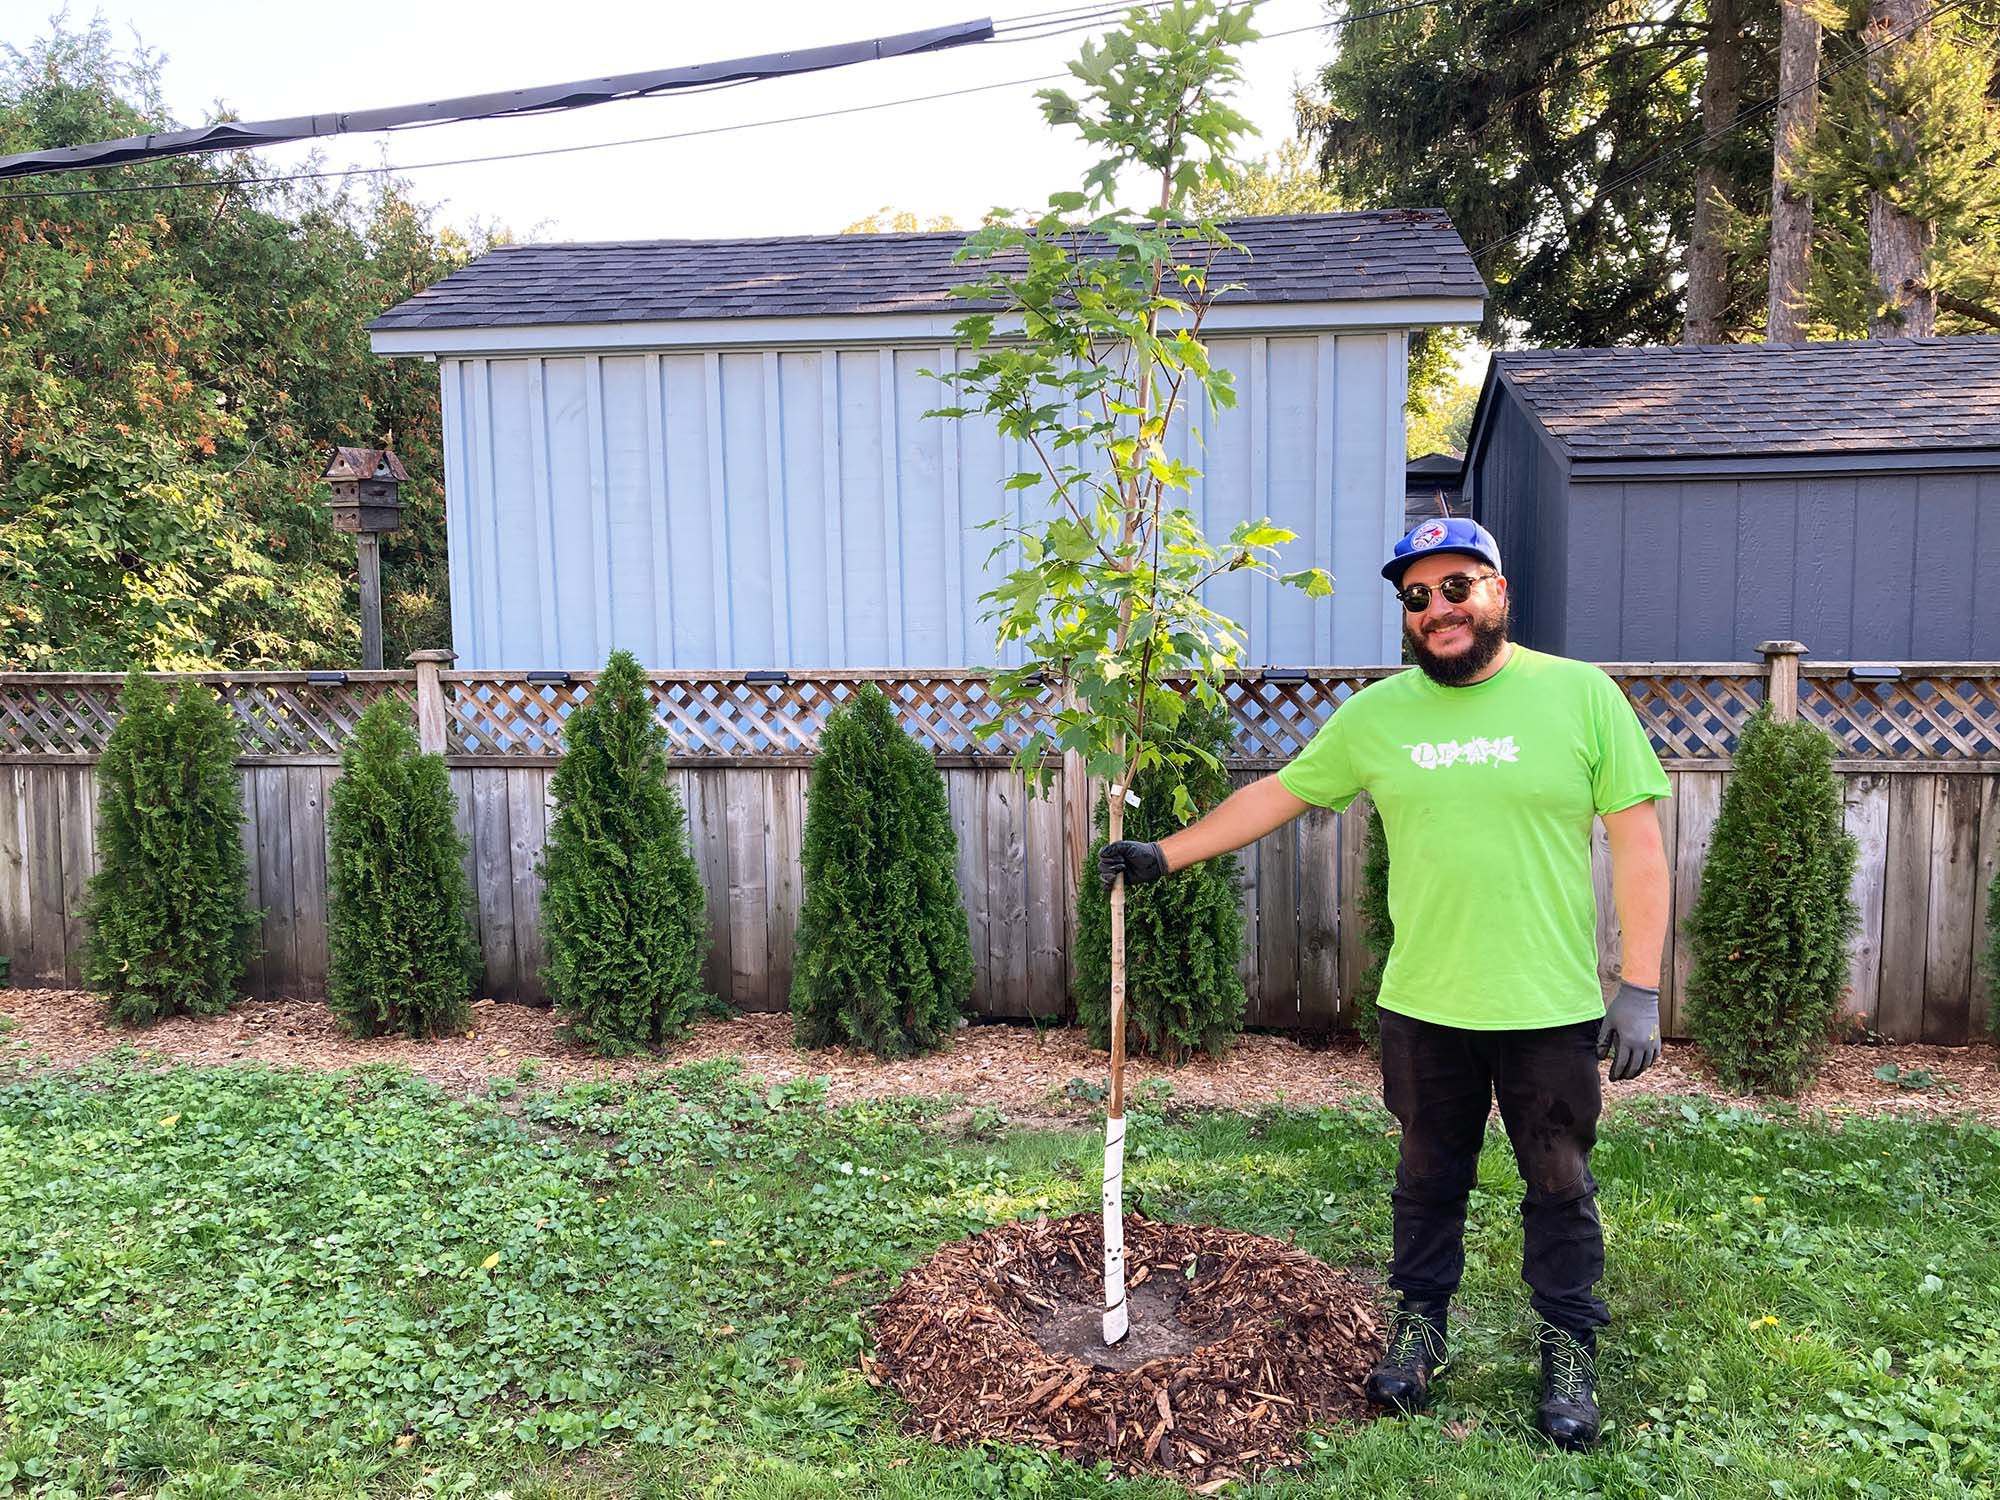 A person stands next to a newly planted maple tree in a home's backyard